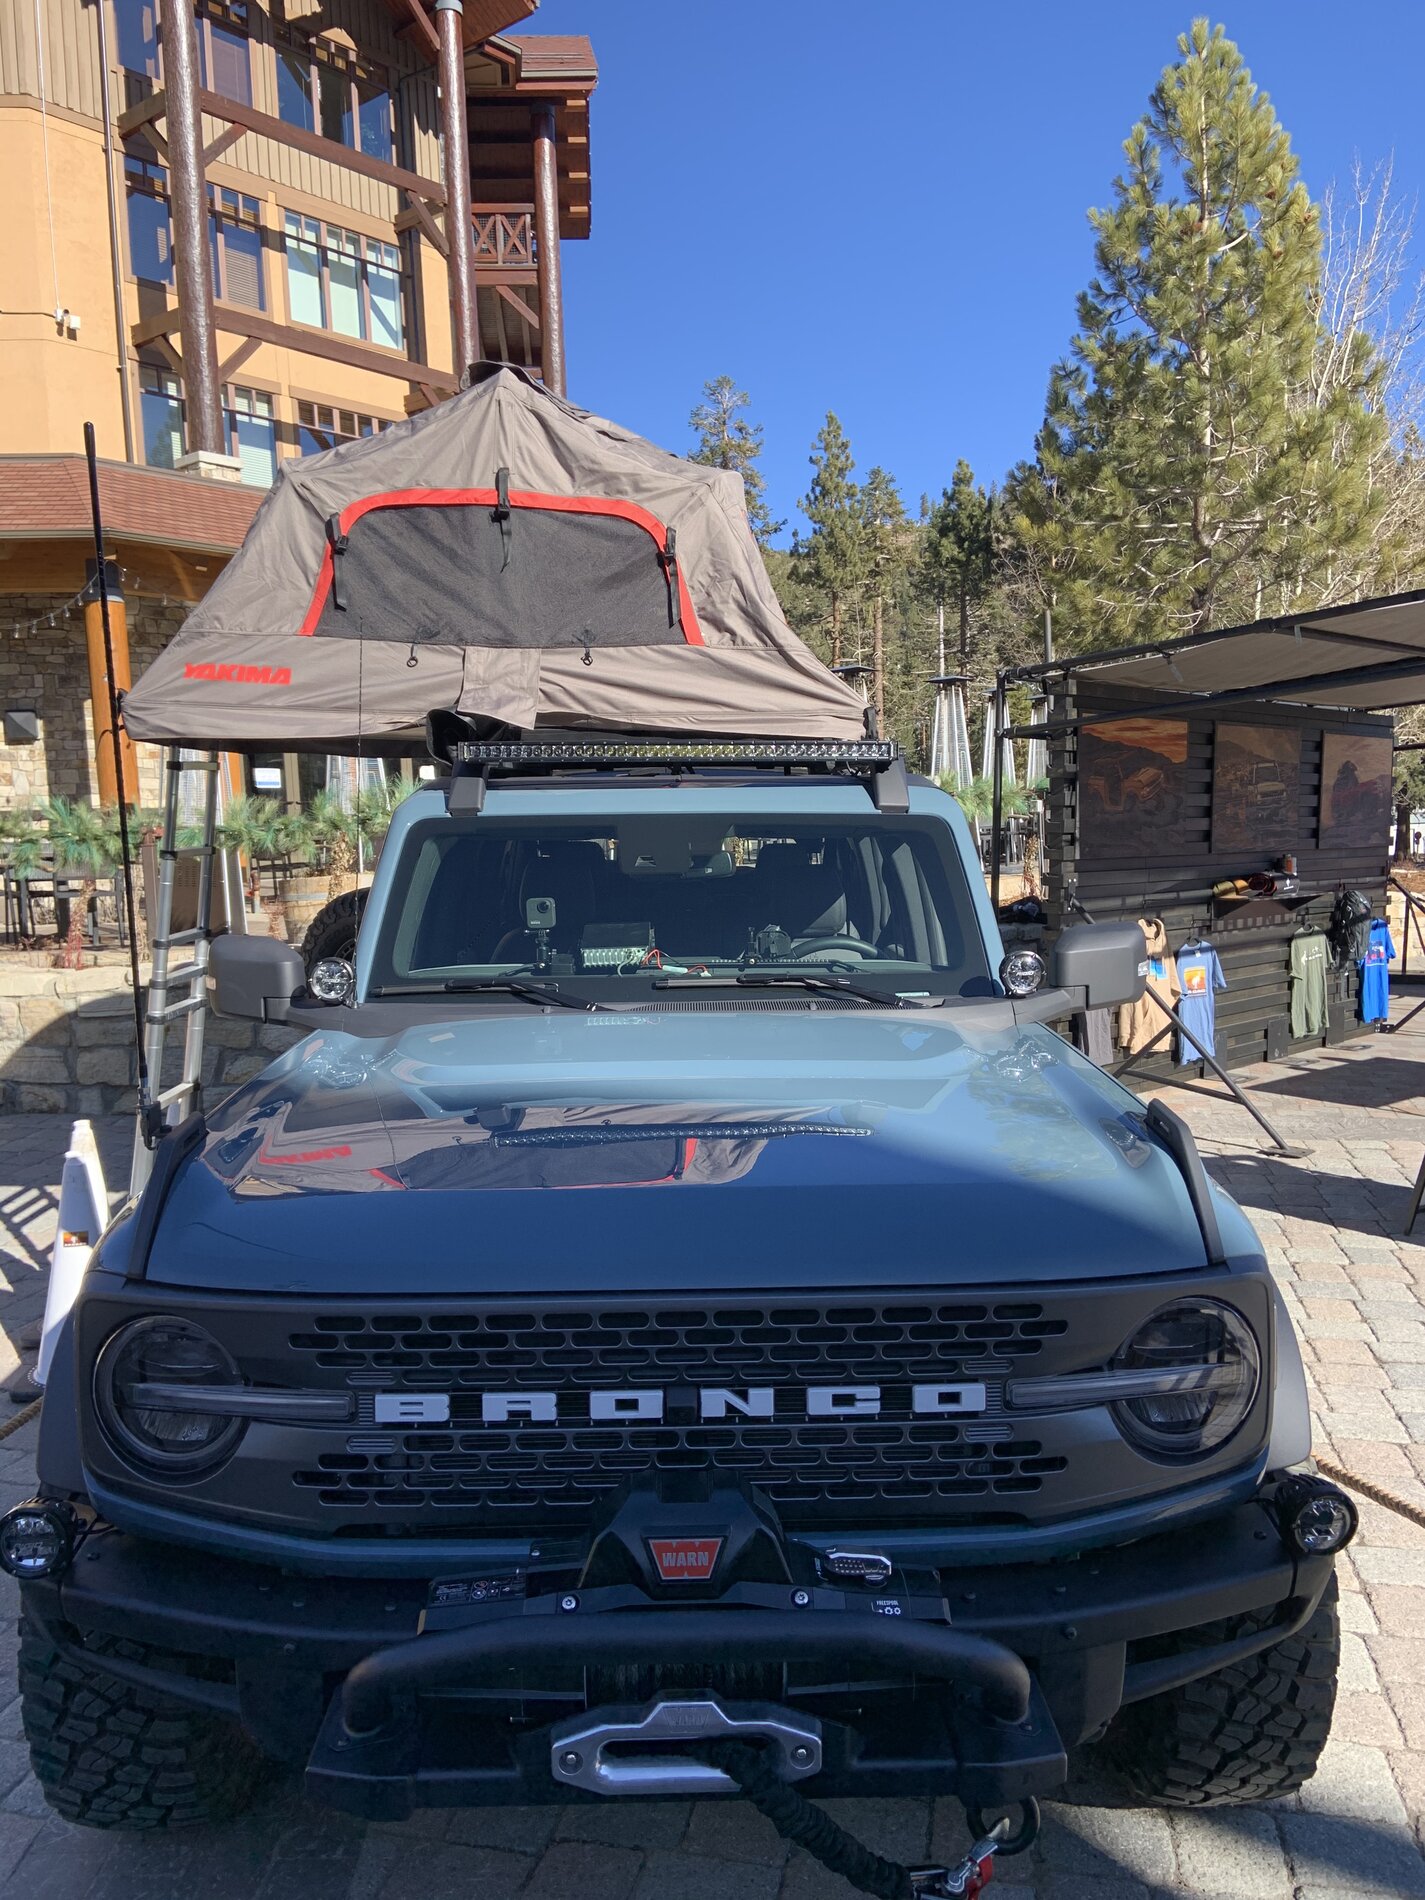 Ford Bronco Pics of the Area 51 Badlands Overland Concept from Mammoth Lakes, CA! 849B72EF-D4BB-437C-8E93-058DE73692EE